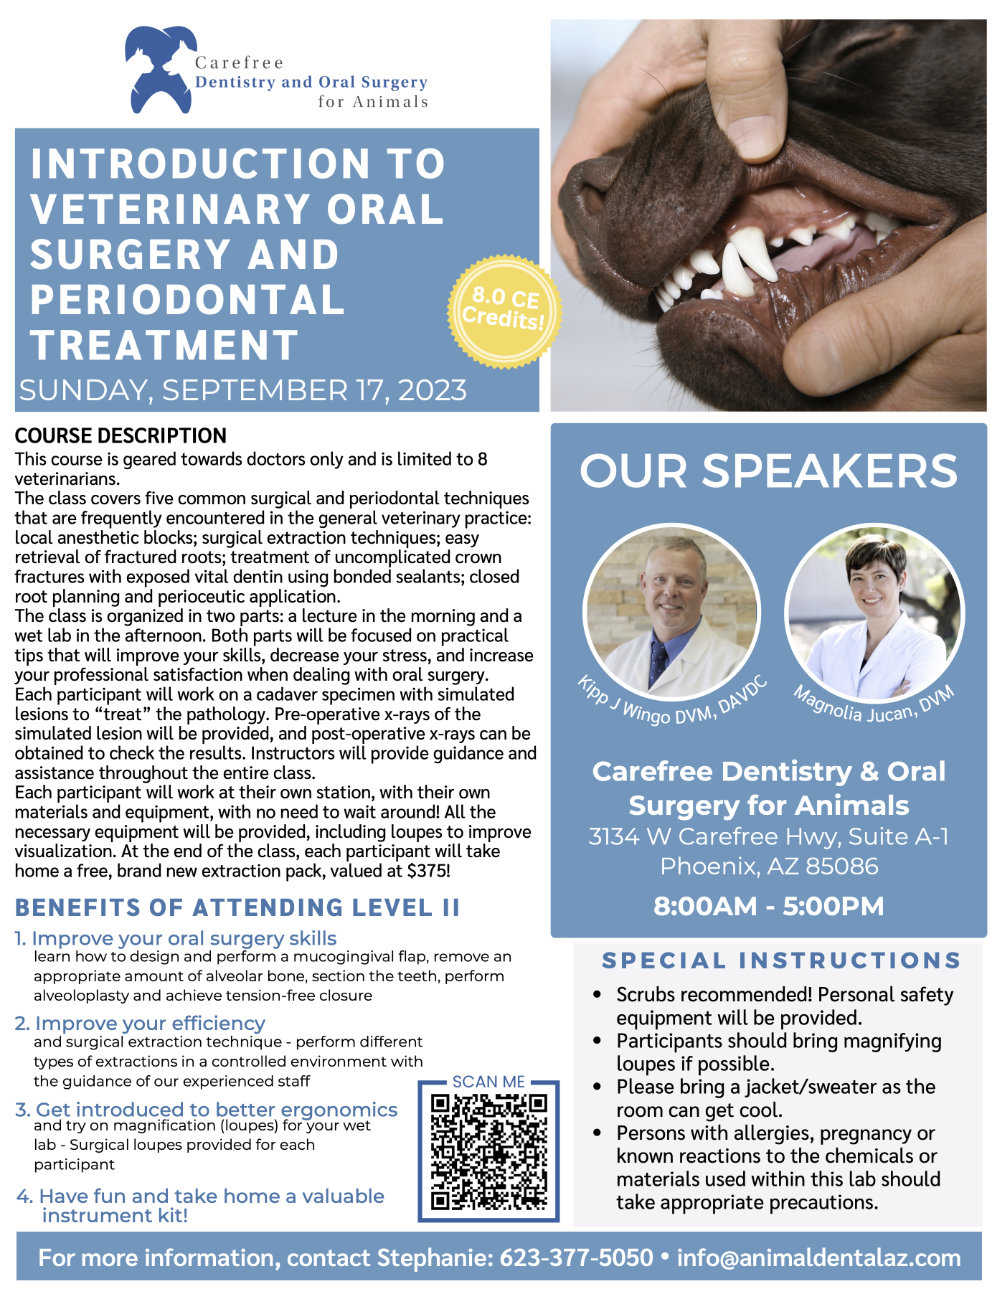 Level II- Introduction to Veterinary Oral Surgery and Periodontal Treatment